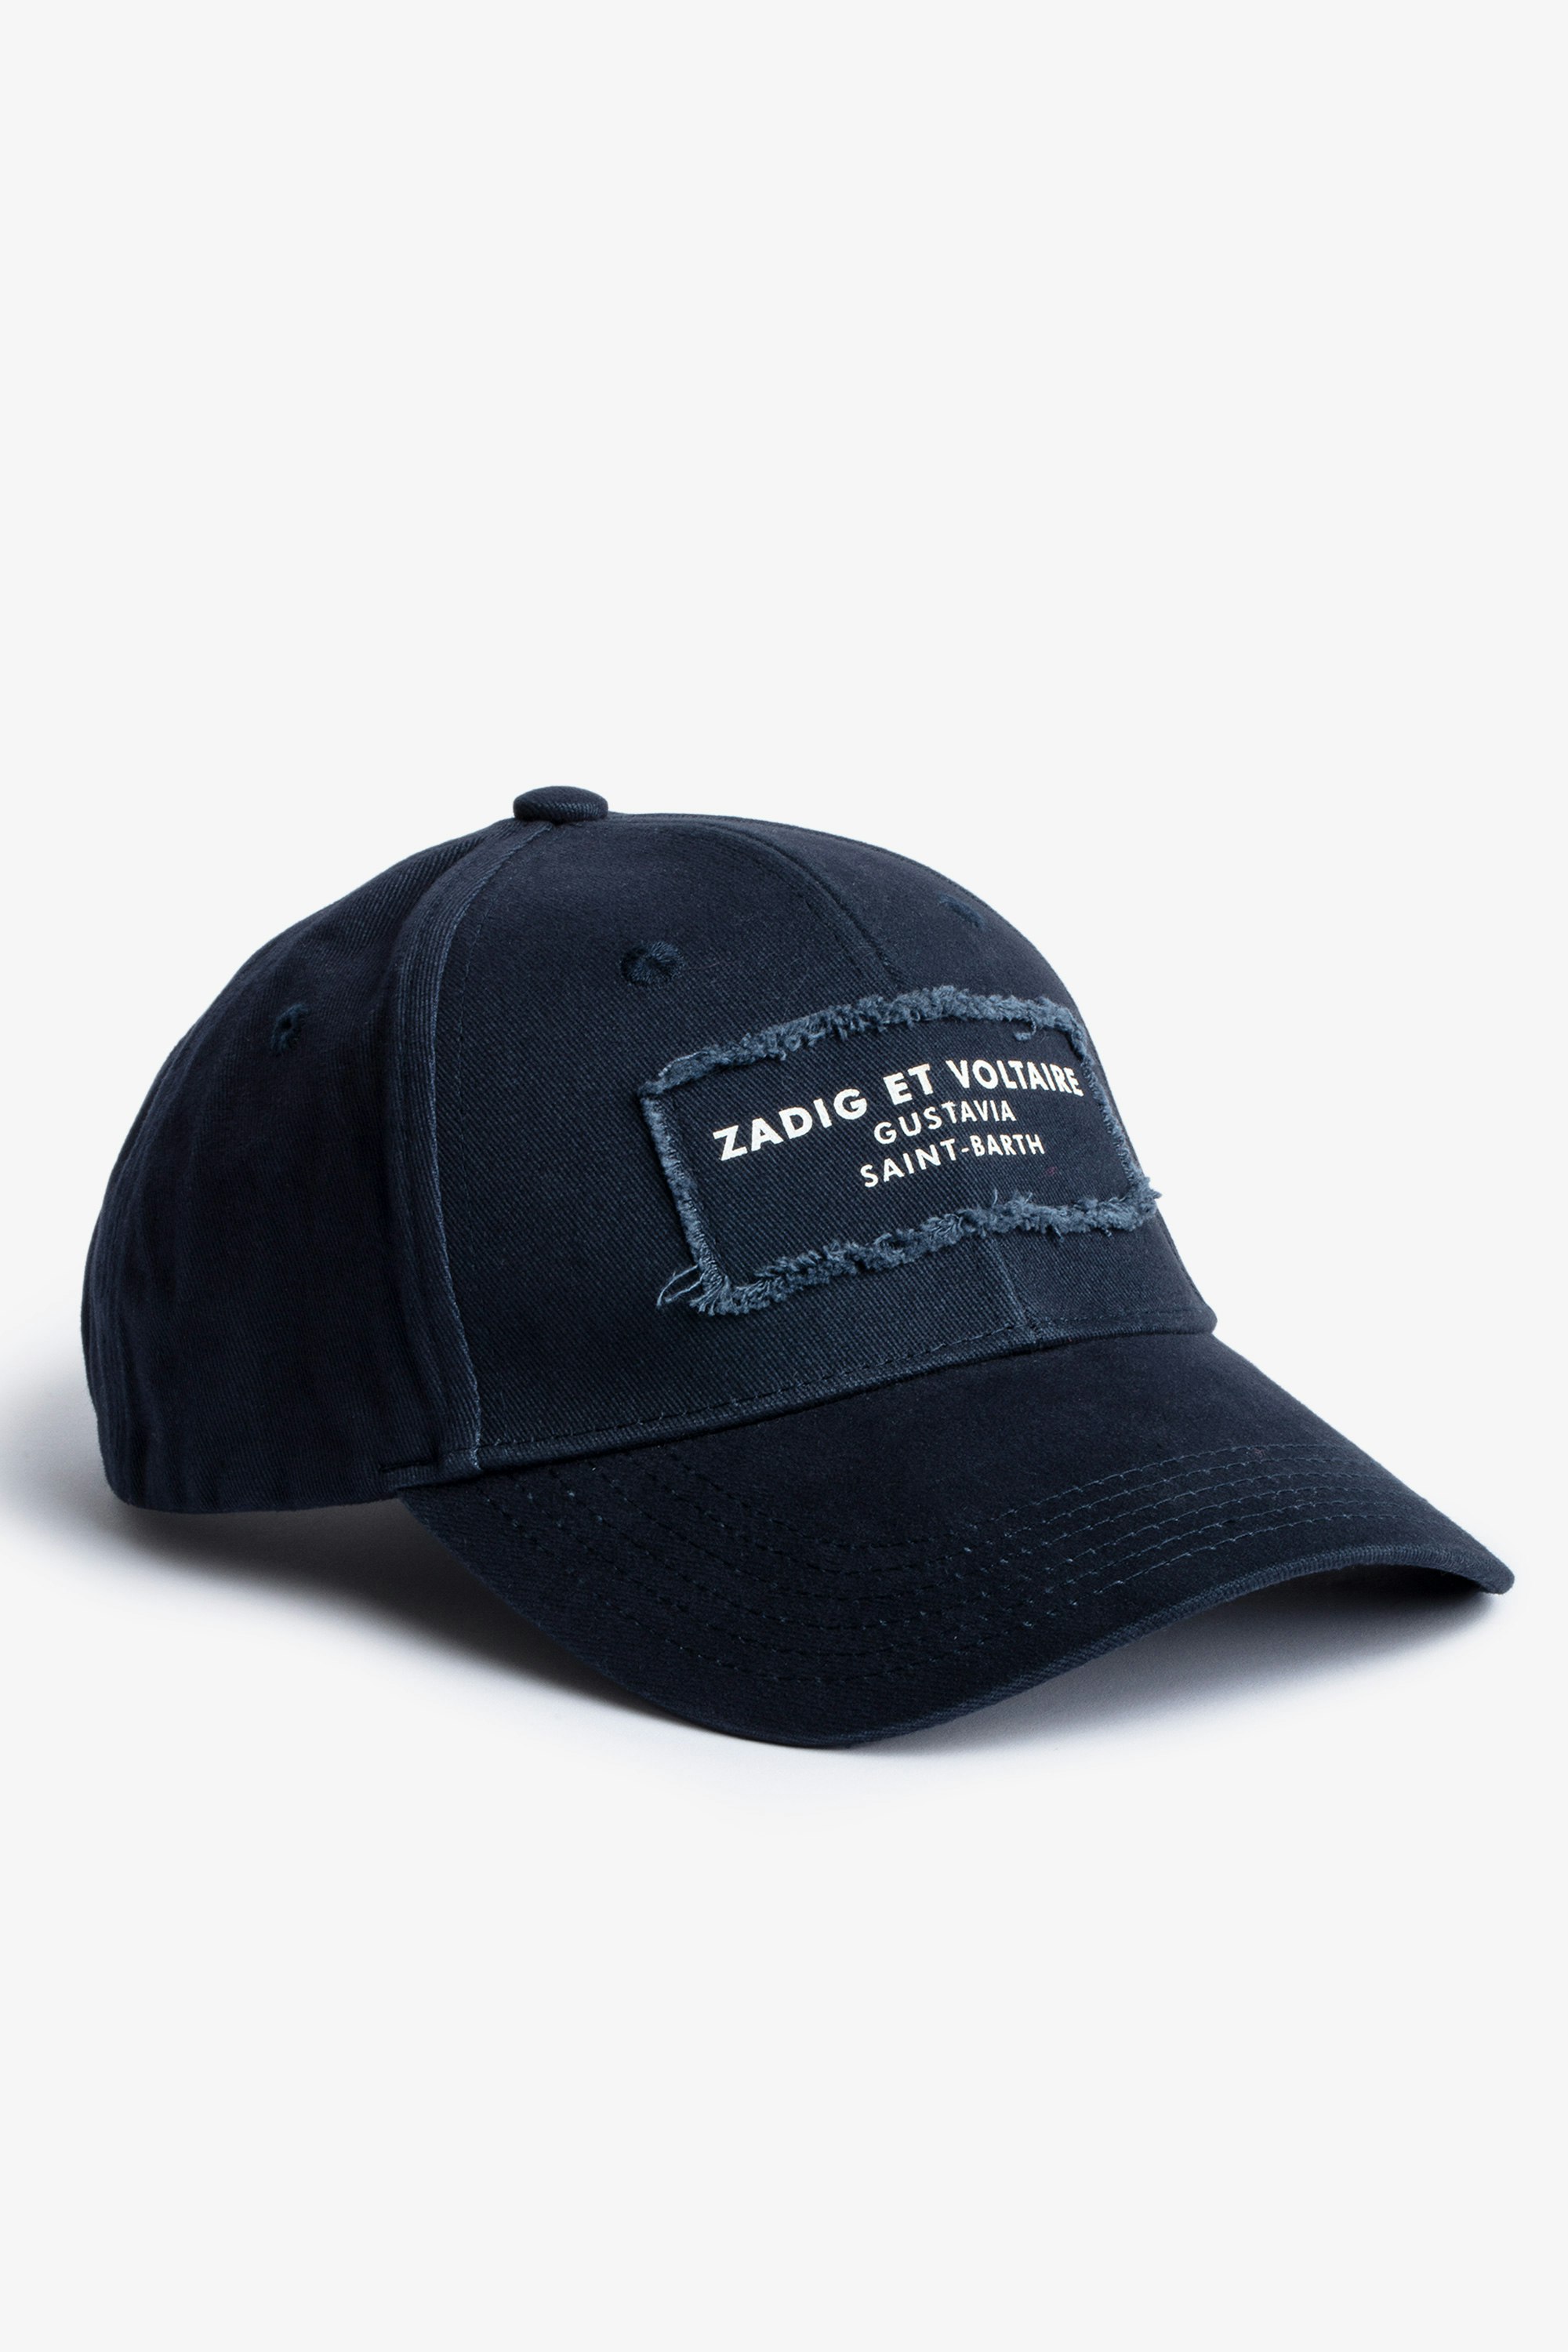 Klelia St Barts 帽子 Navy blue cotton cap with St Barts embroidery 